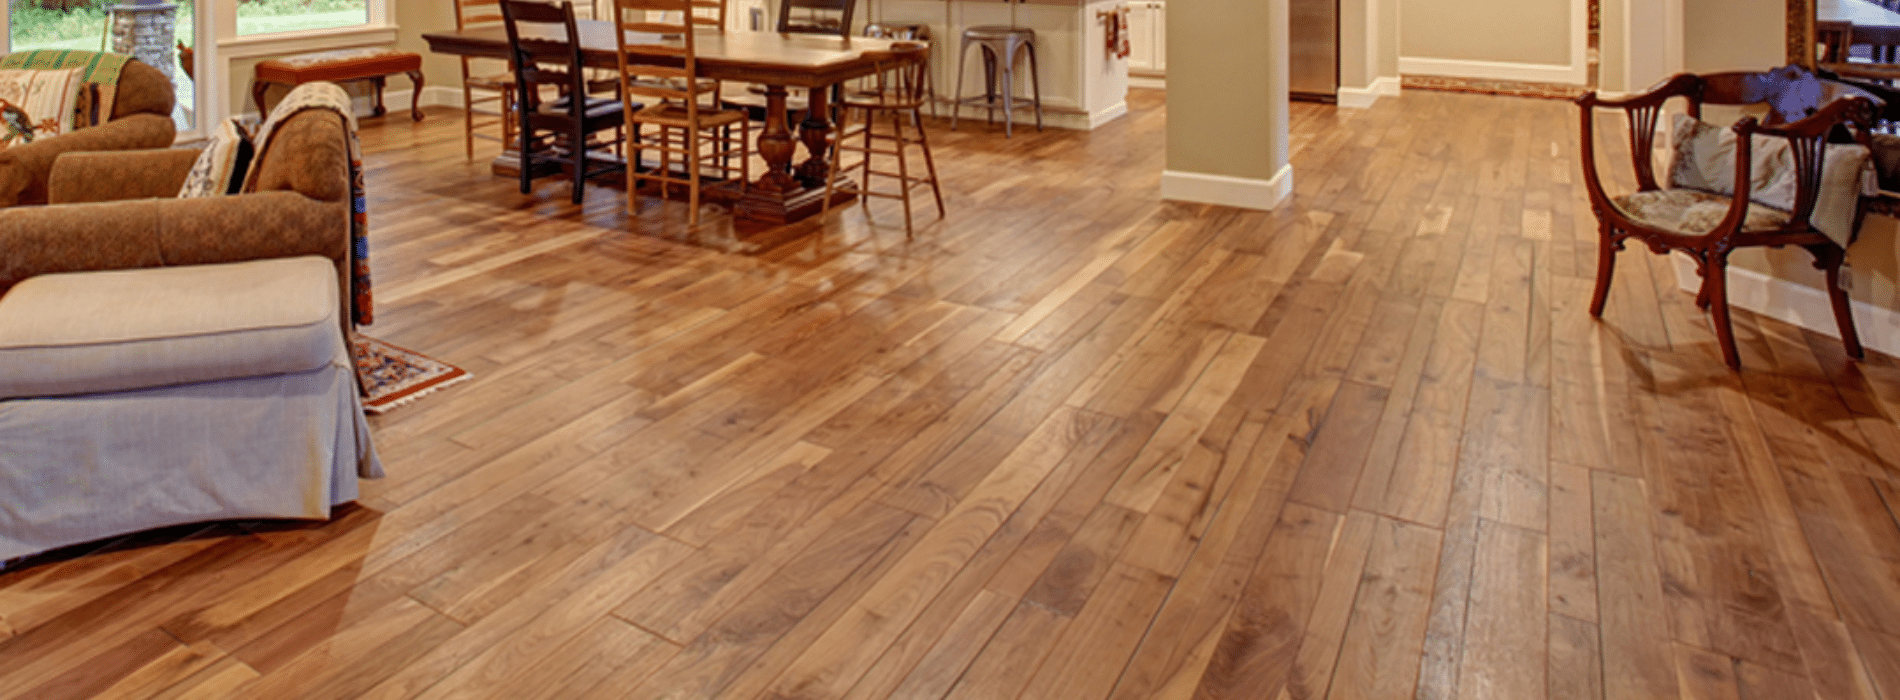 Expertly restored engineered oak floors by Mr Sander® in Poplar, E14. Marvel at the stunning transformation, revealing the natural beauty of the wood. The warm mid-oak stain and Junckers Strong satin finish ensure long-lasting durability and timeless elegance.